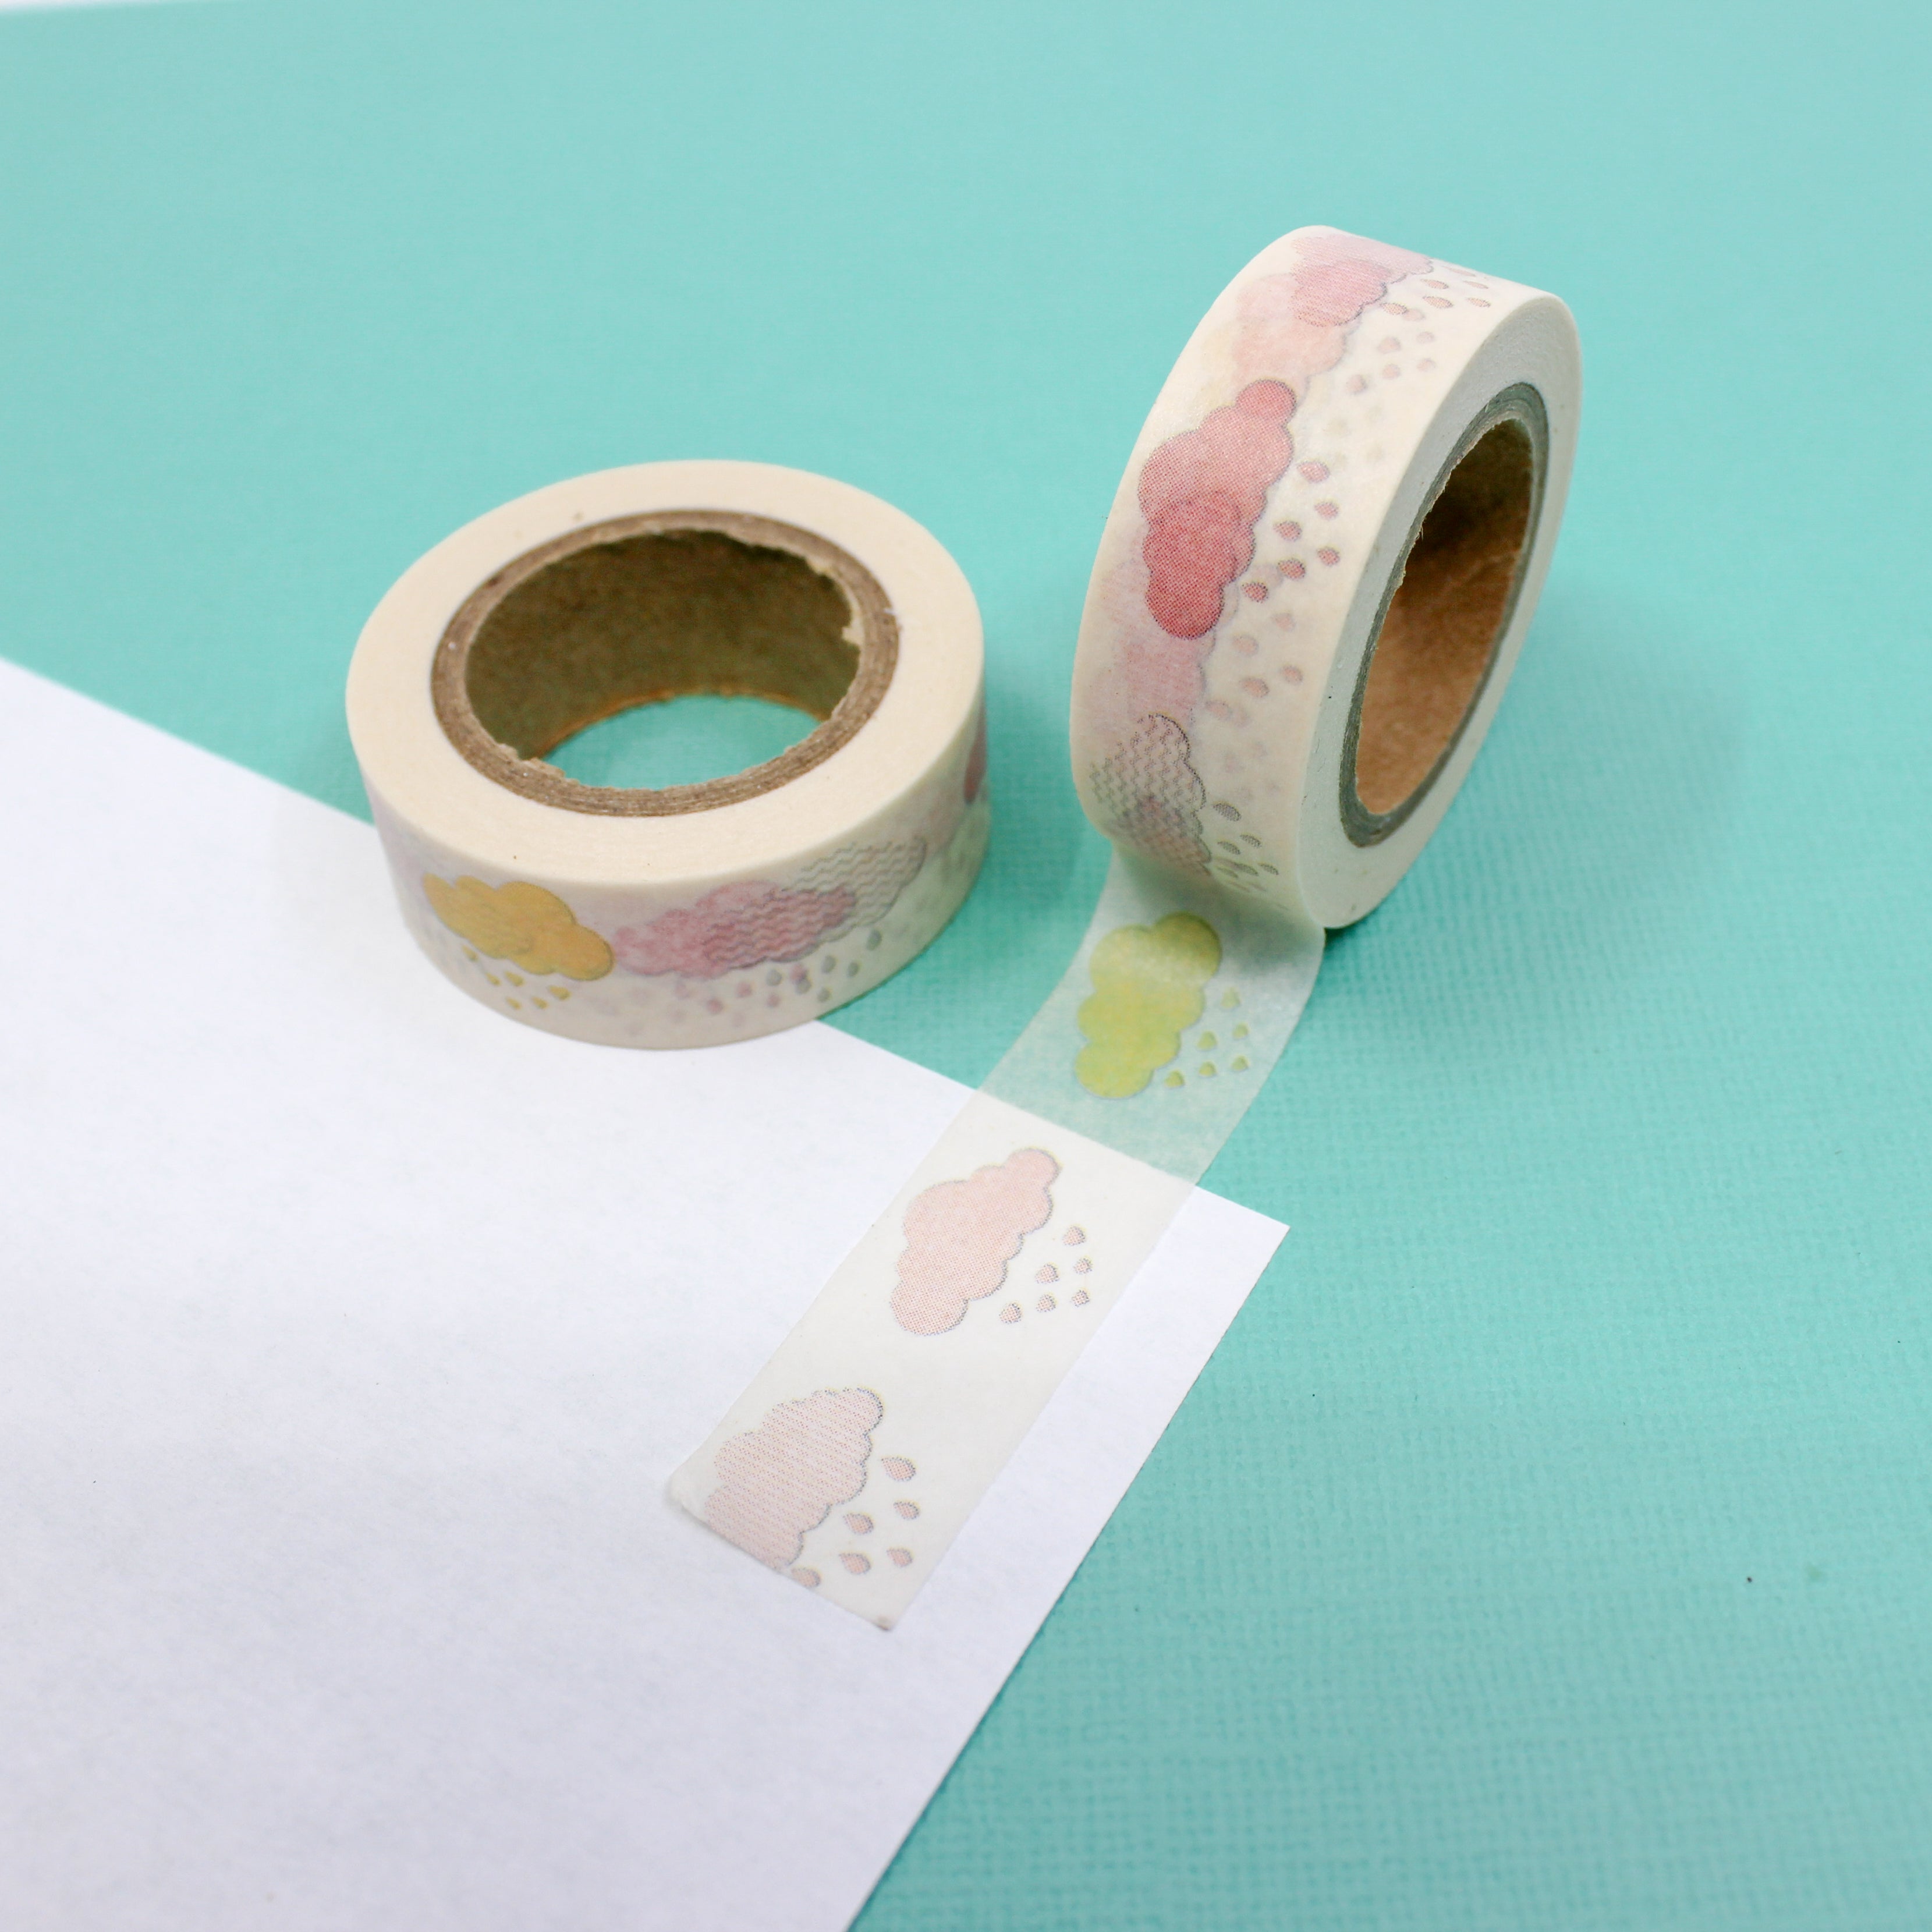 This is a colorful clouds with raindrops pattern Washi Tape from BBB Supplies Craft Shop